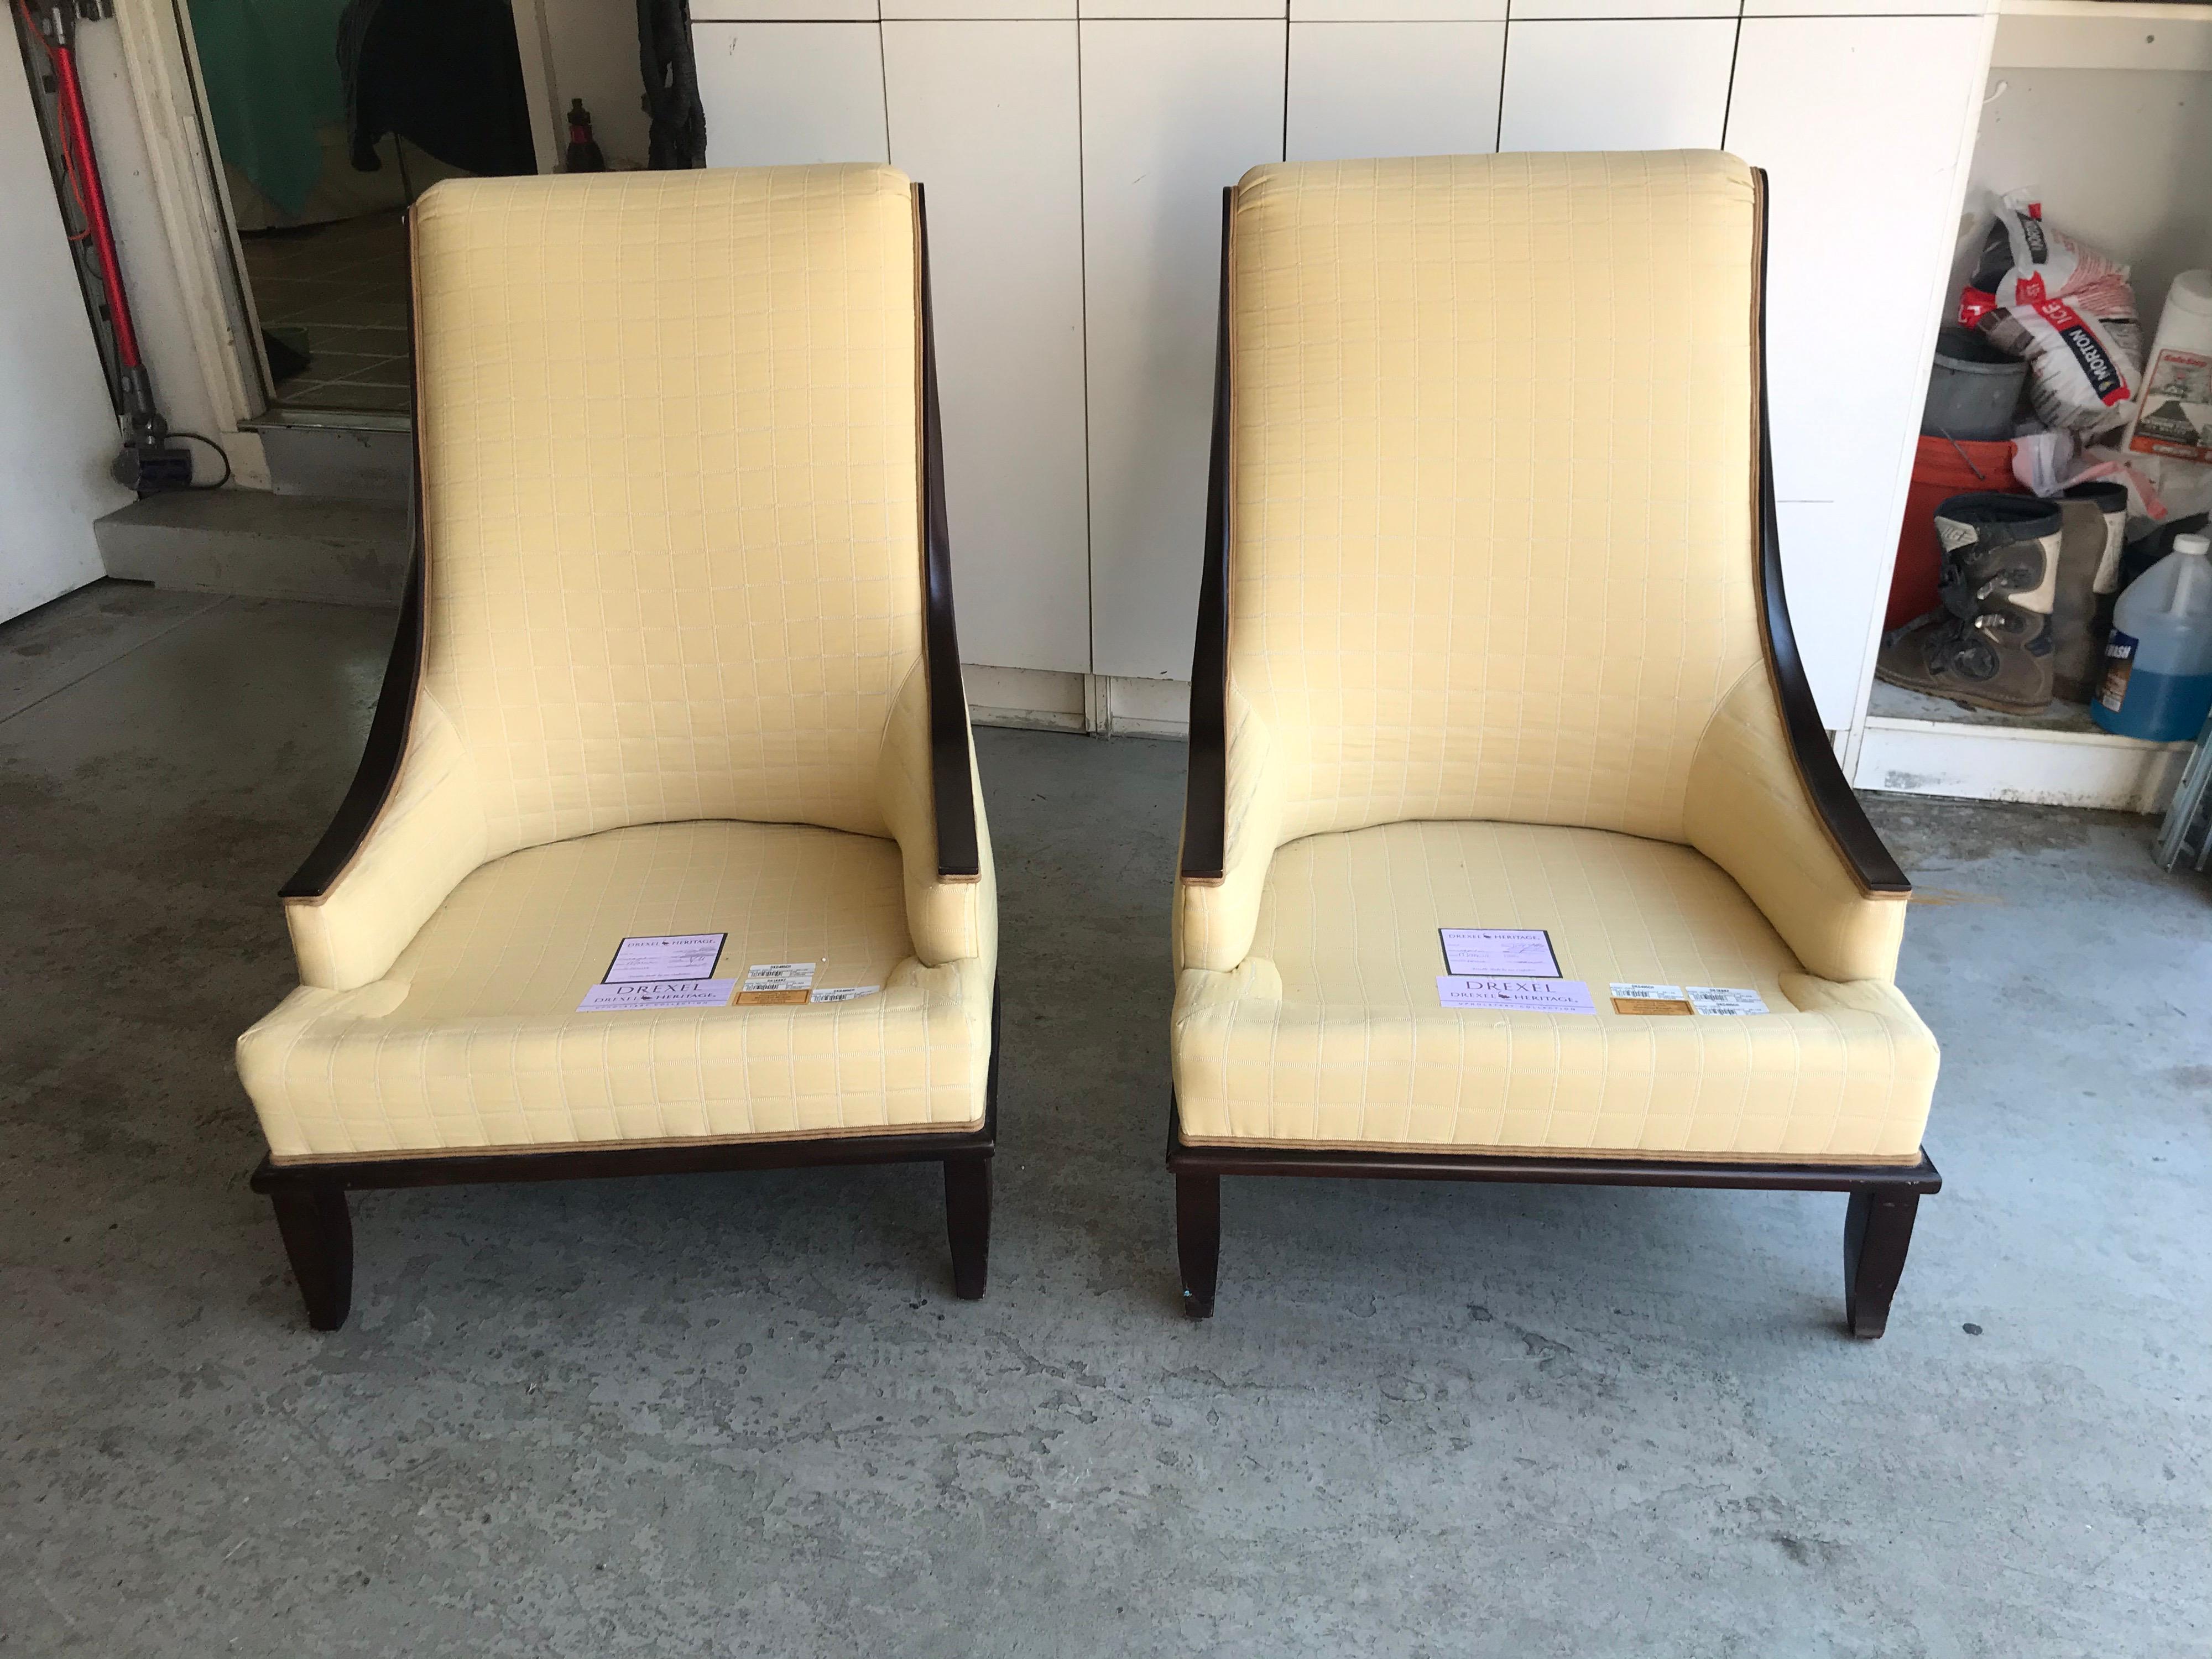 This is a pair of lovely shaped Drexel heritage upholstered chairs 
The upholstery is in a butter yellow and in great vintage condition The chairs are incredibly comfortable.